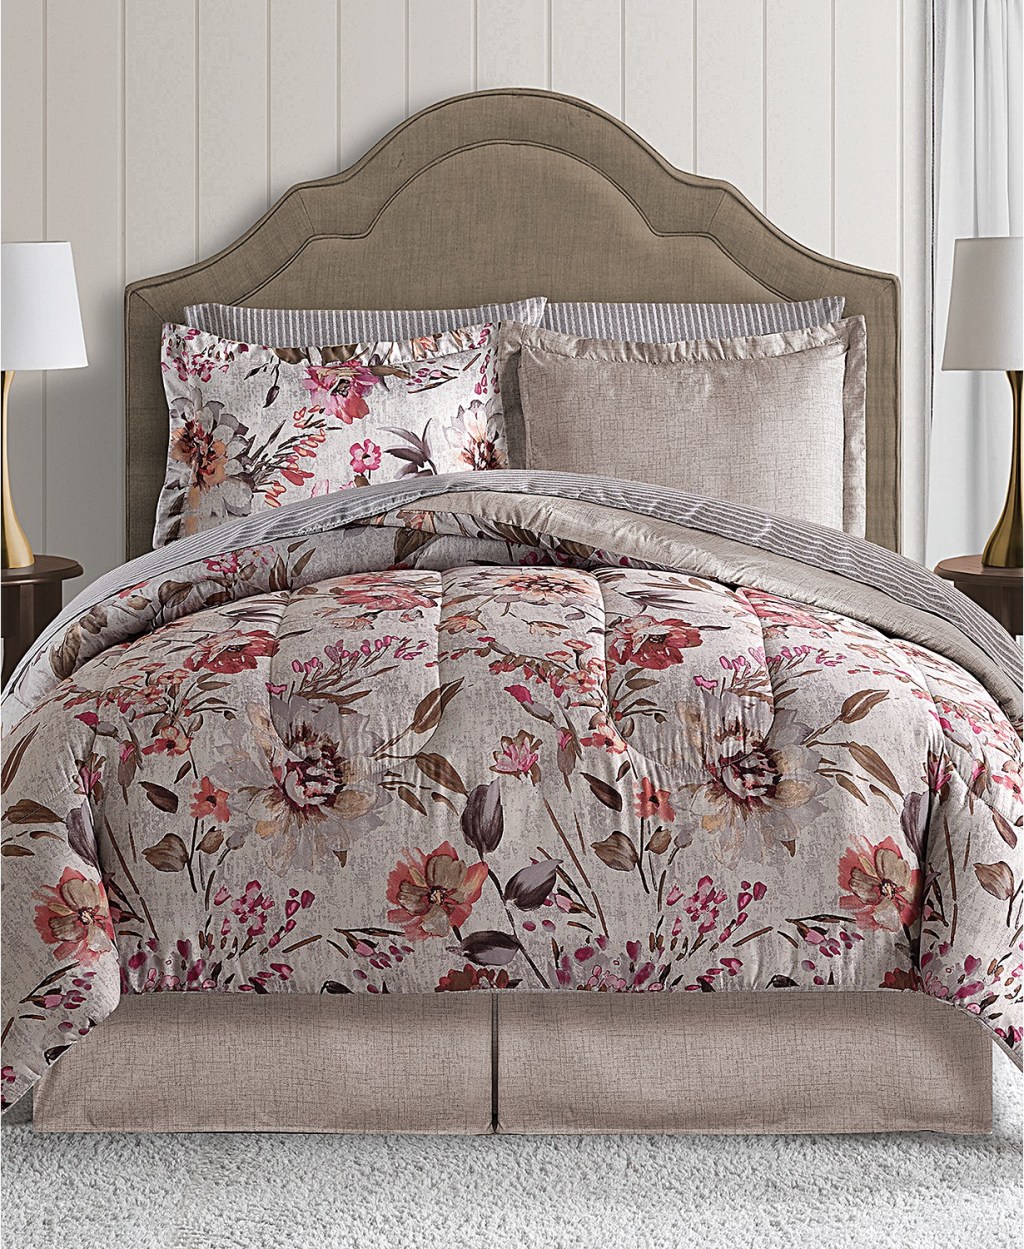 Macy’www.paulmartinsmith.com Reversible 8-Piece Comforter Set Just $27.99 (Regularly $100) – ALL Sizes - Hip2Save